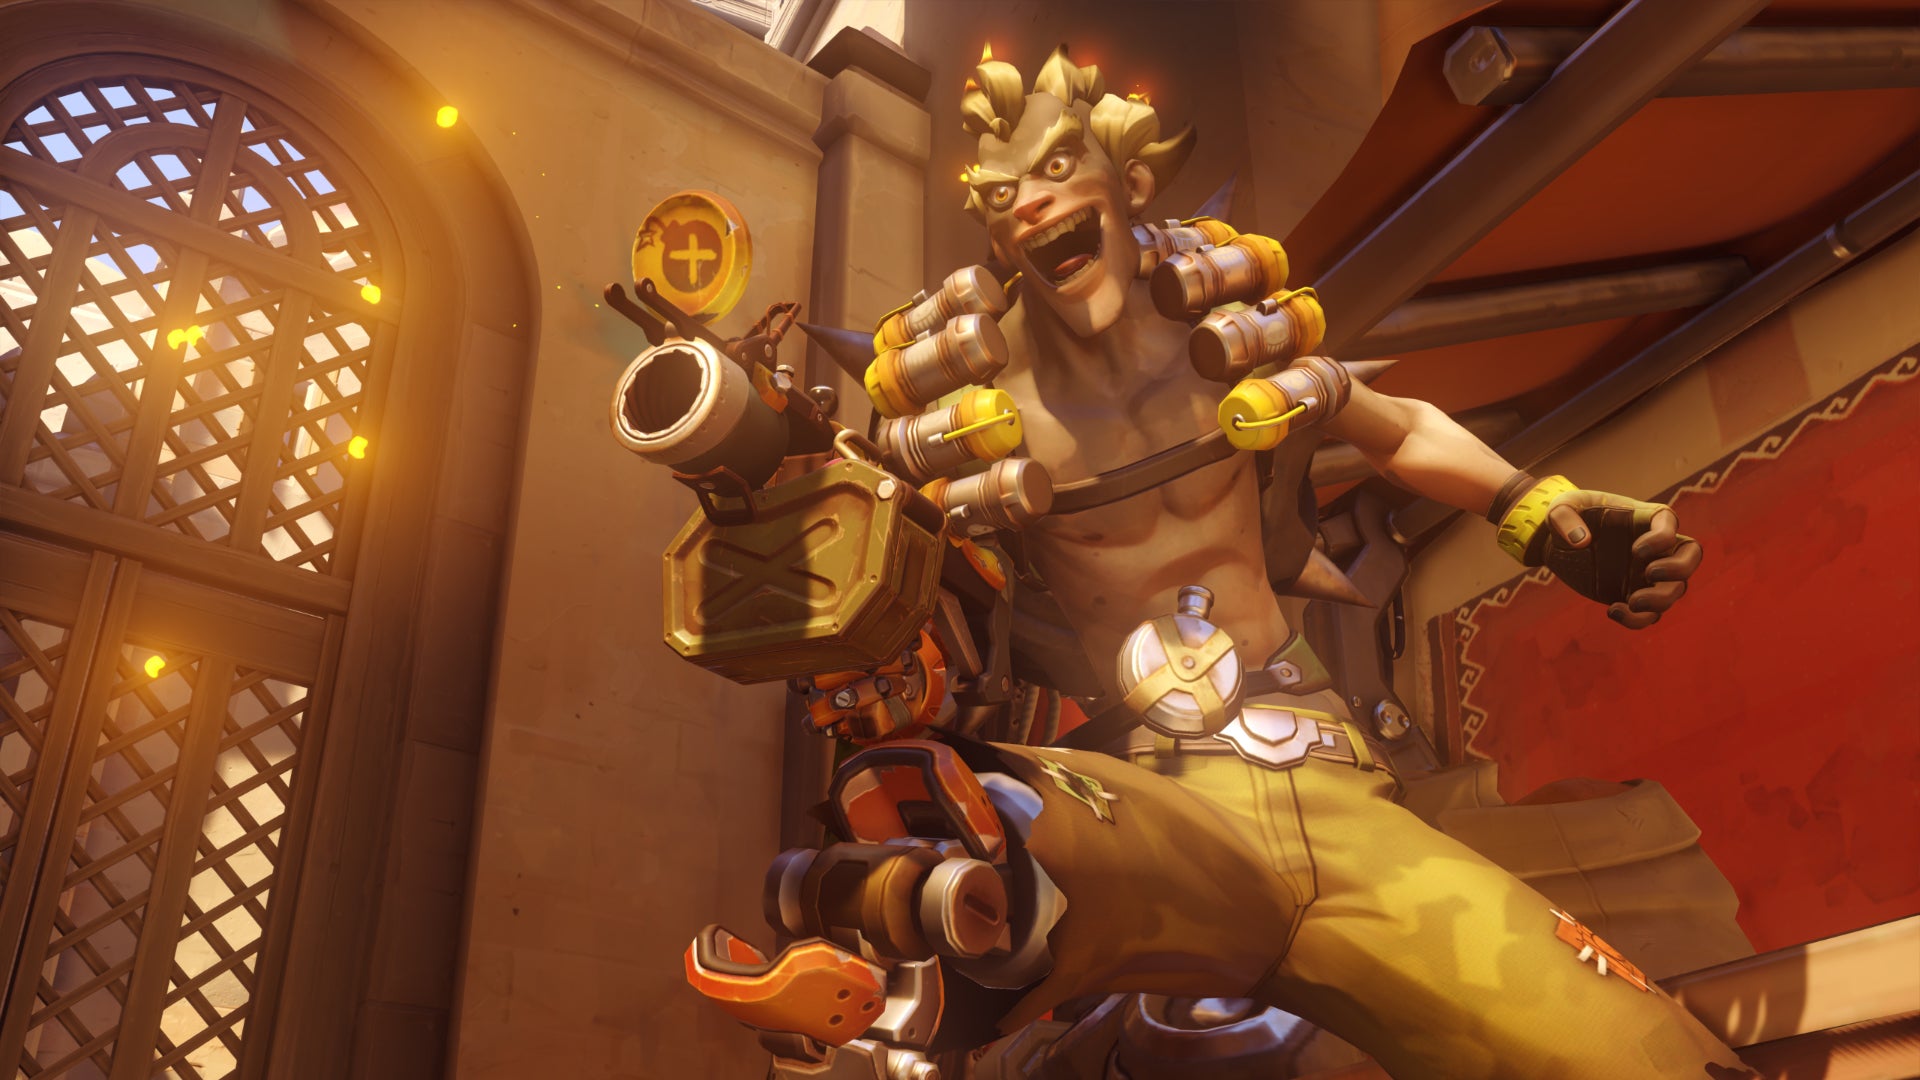 Junkrat, a hero in Overwatch 2, stands in front of the camera laughing and aiming his grenade launcher off-screen.